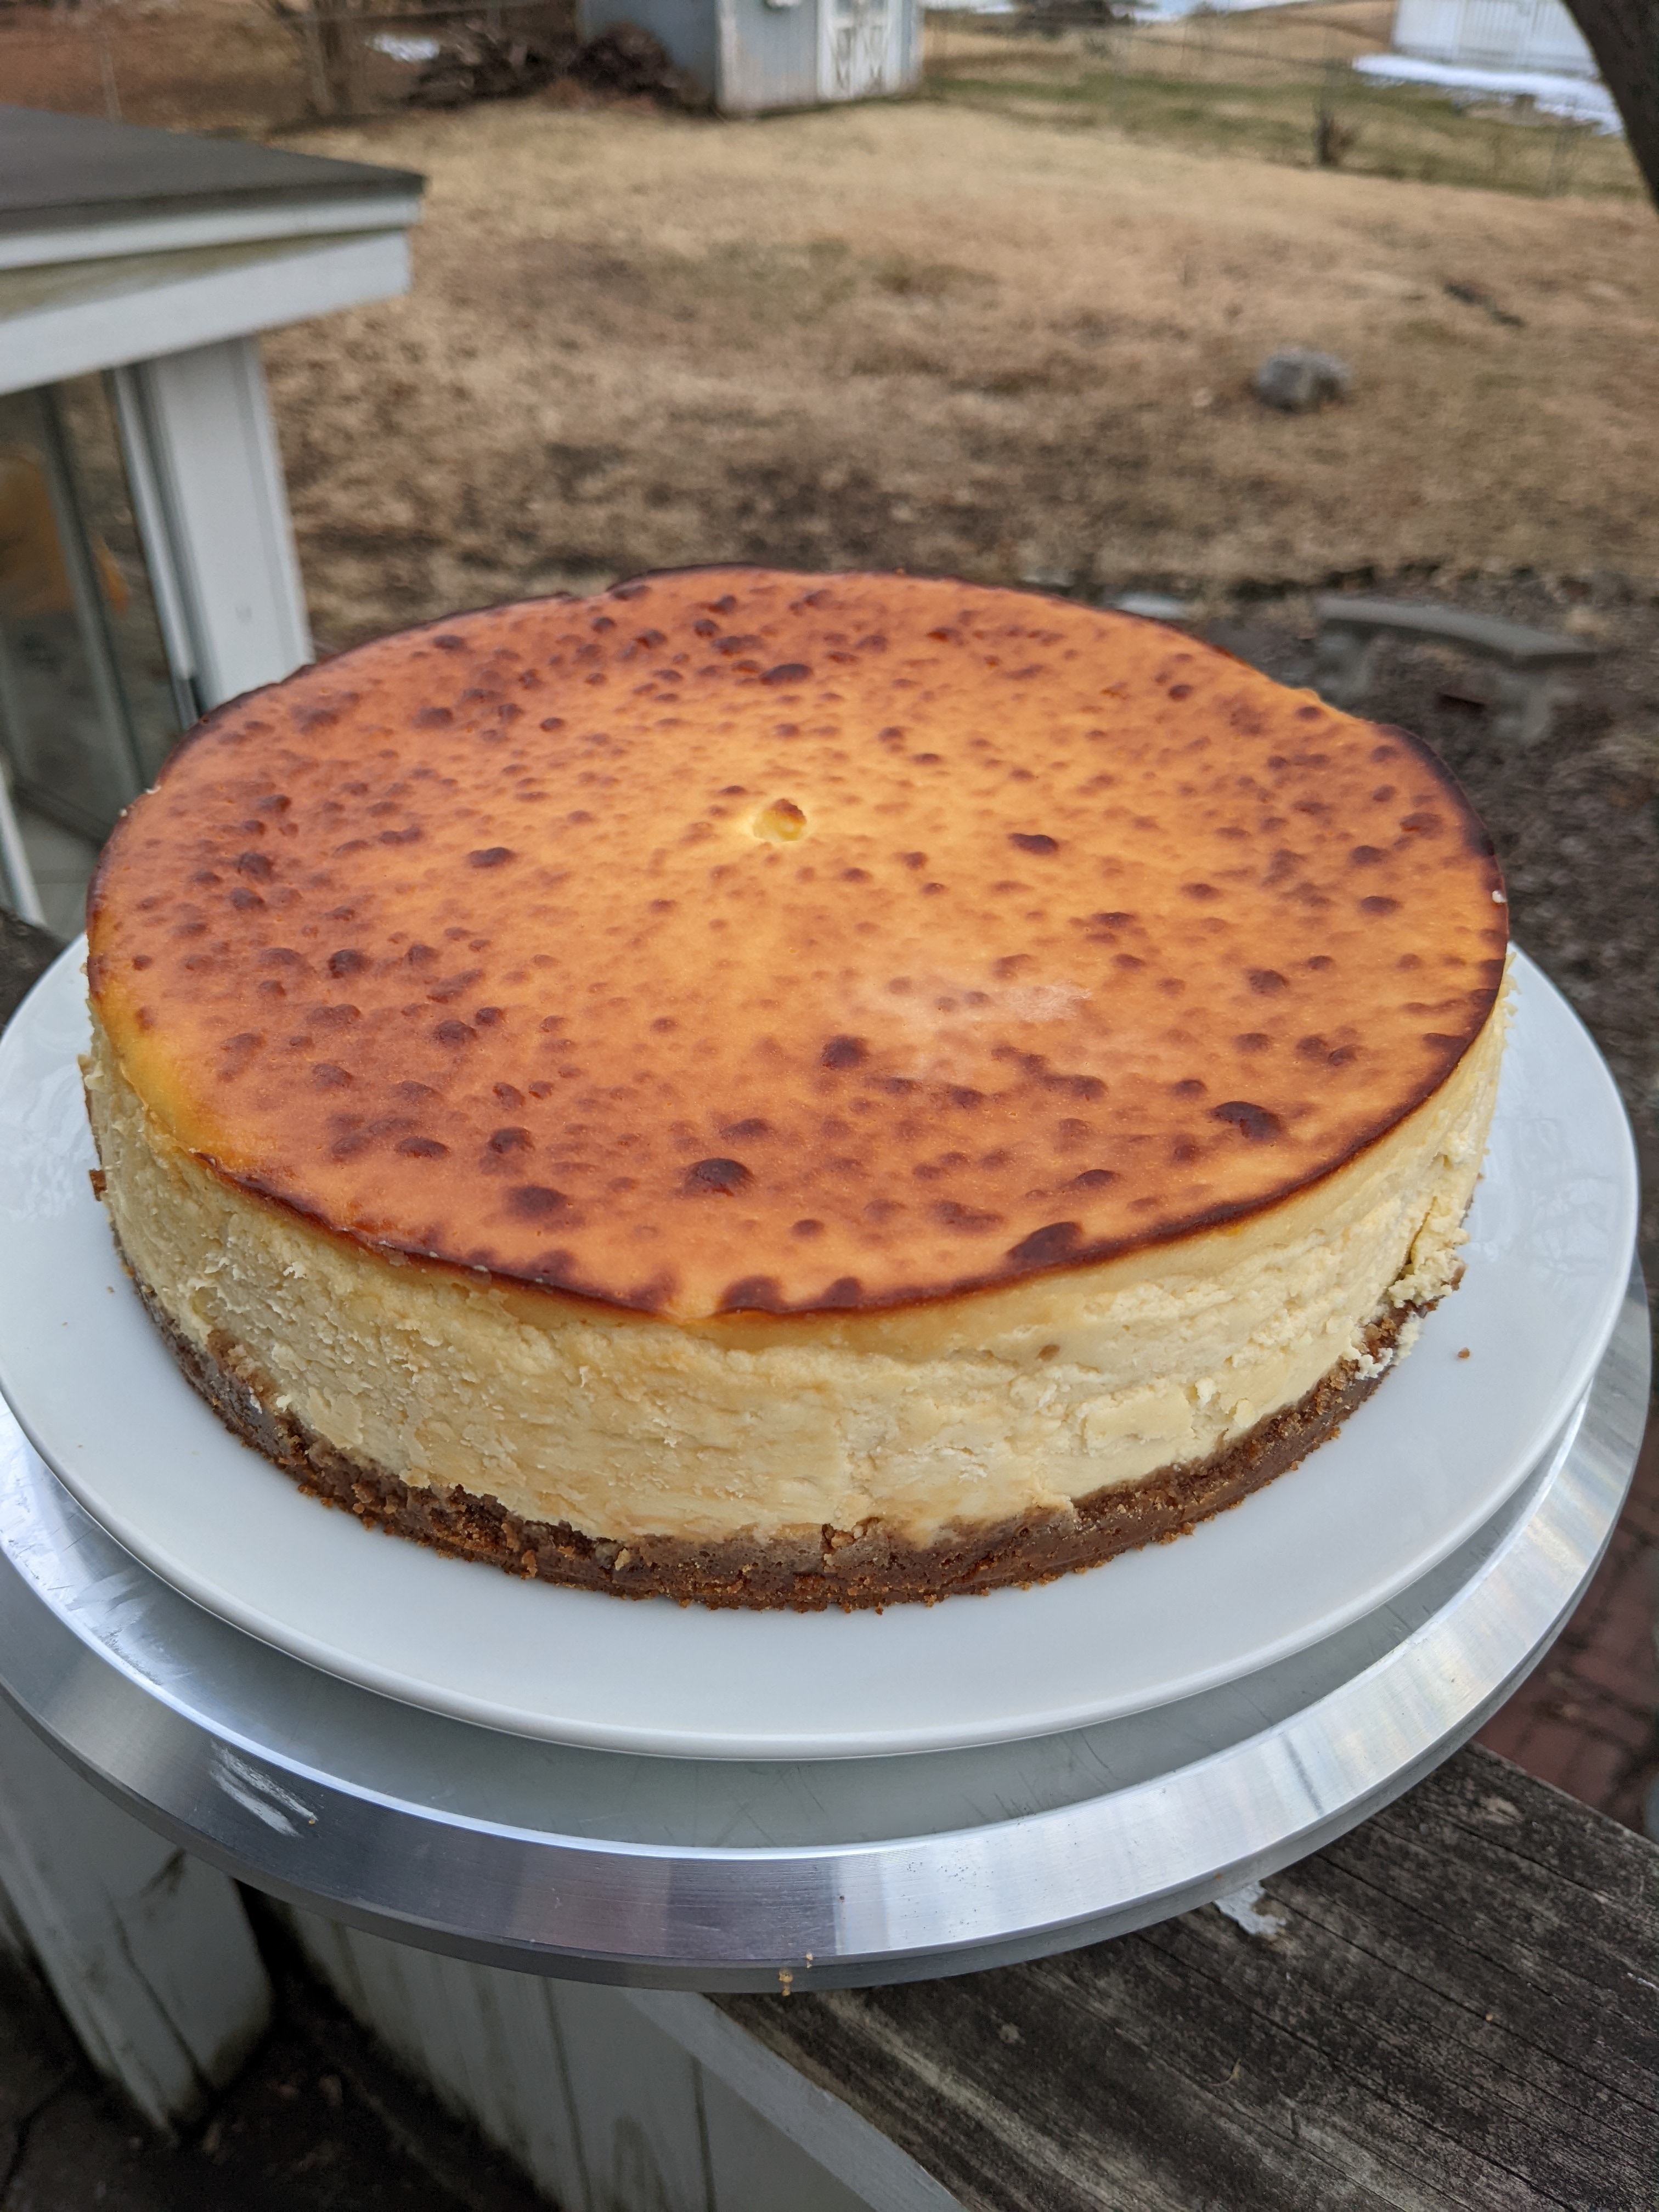 A cheesecake with yellow sides and a golden top